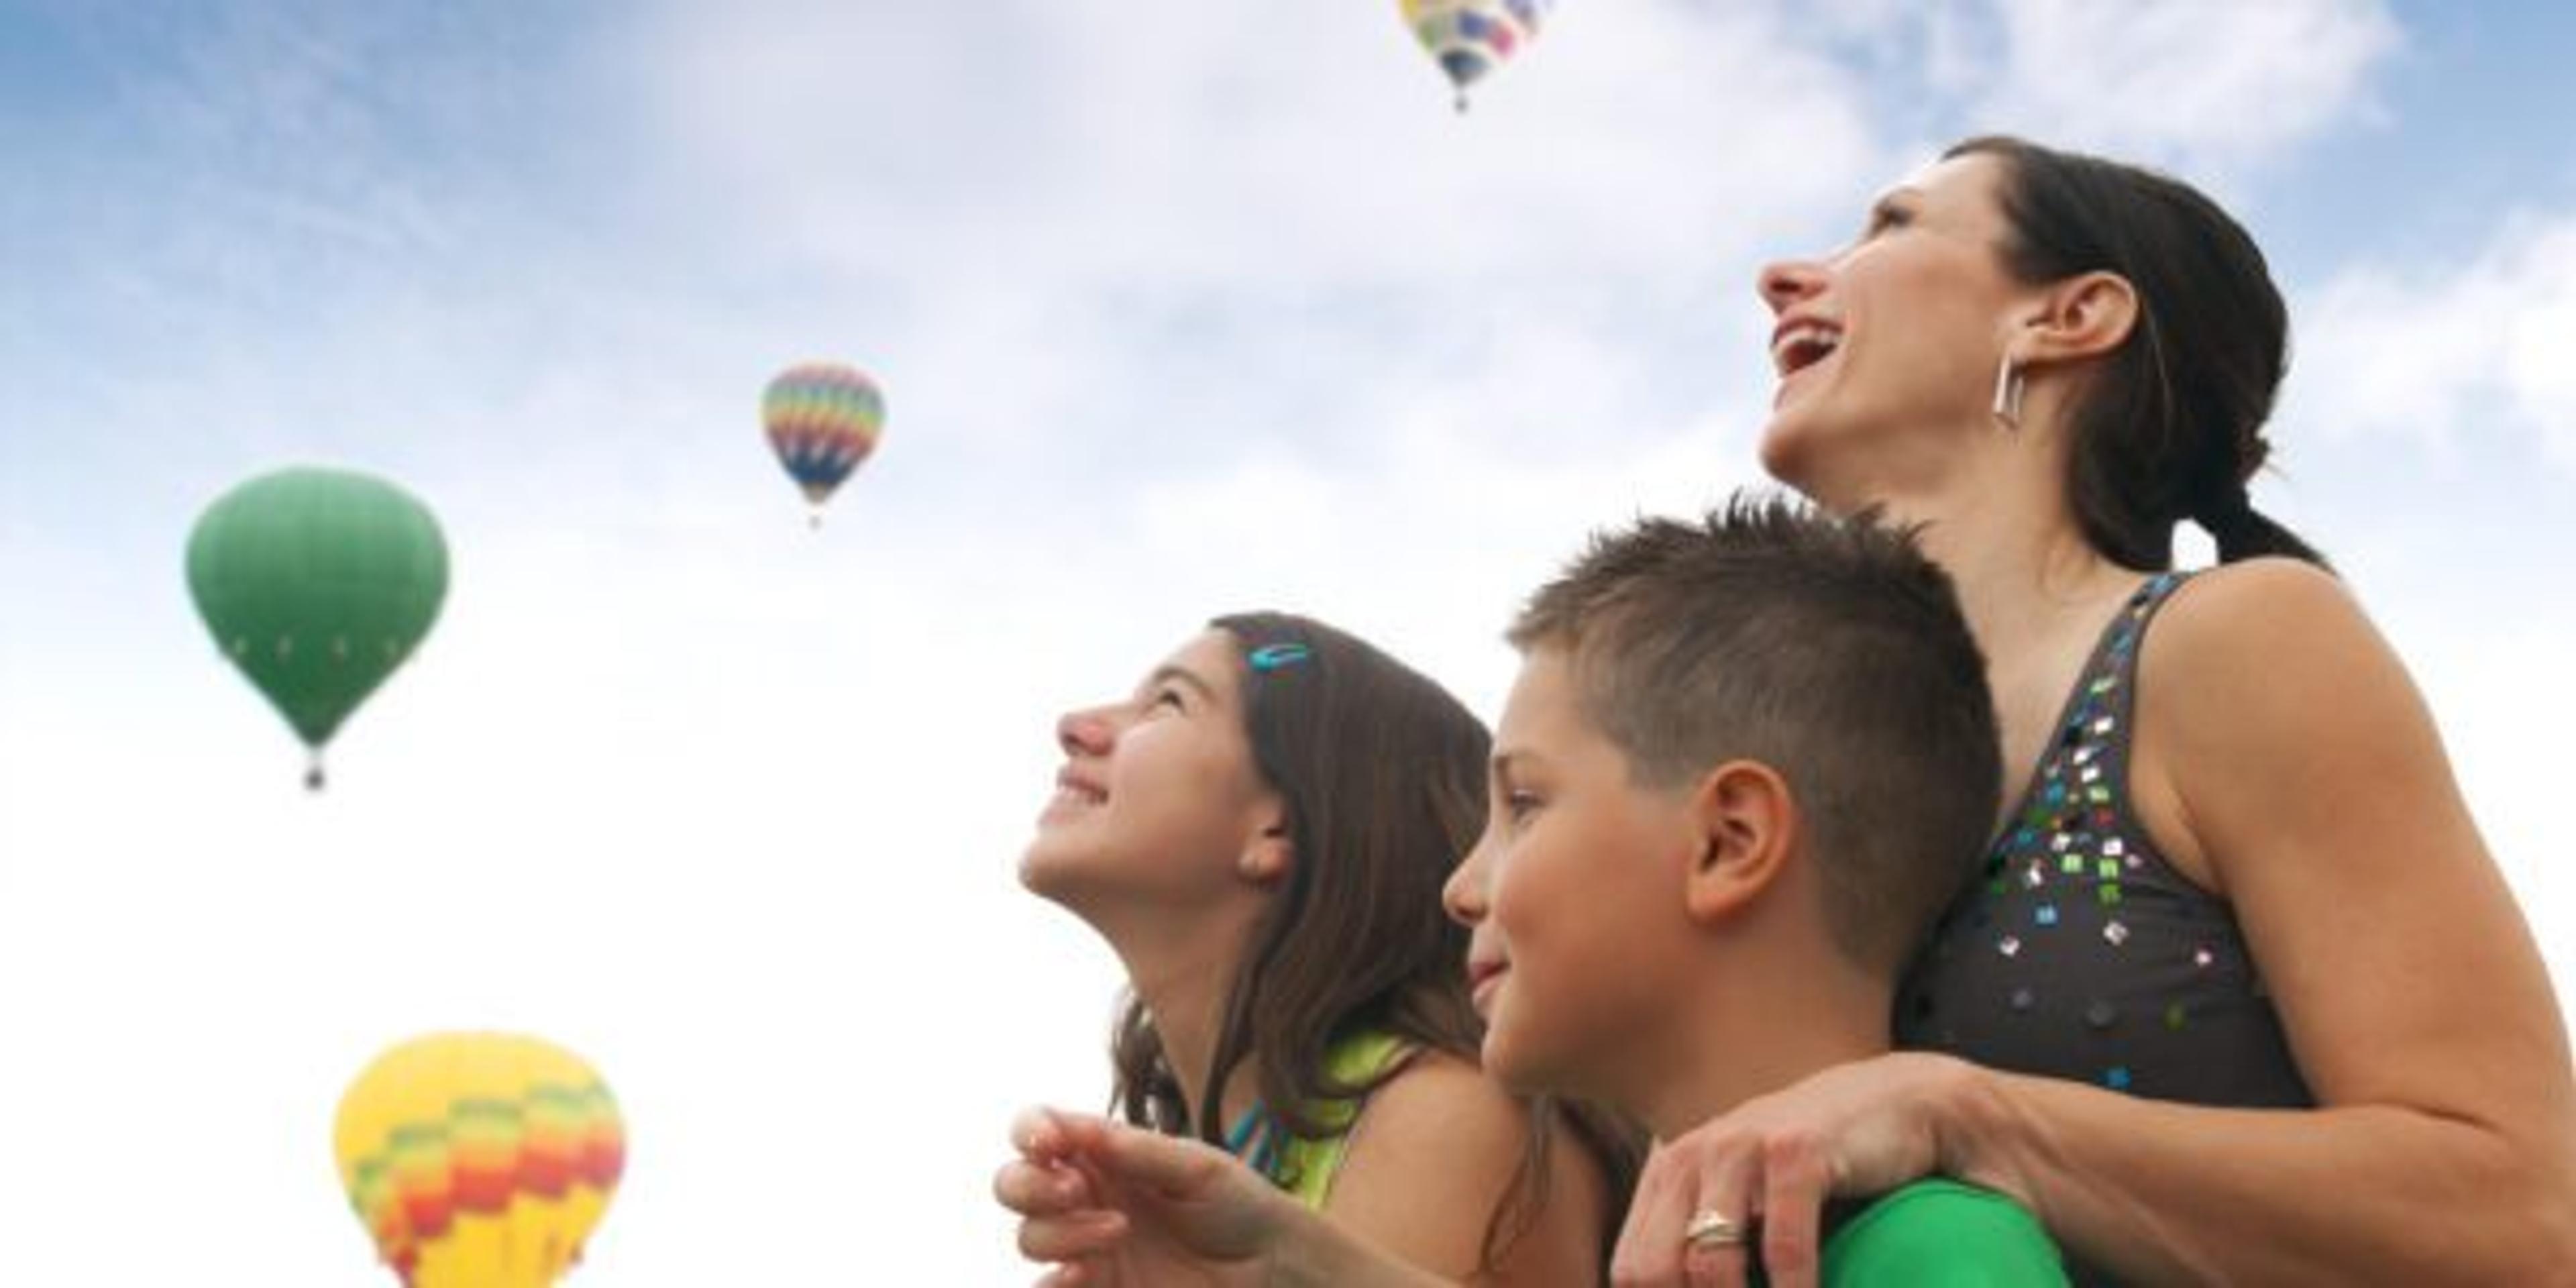 Family watching hot air balloons during a Michigan summer festival